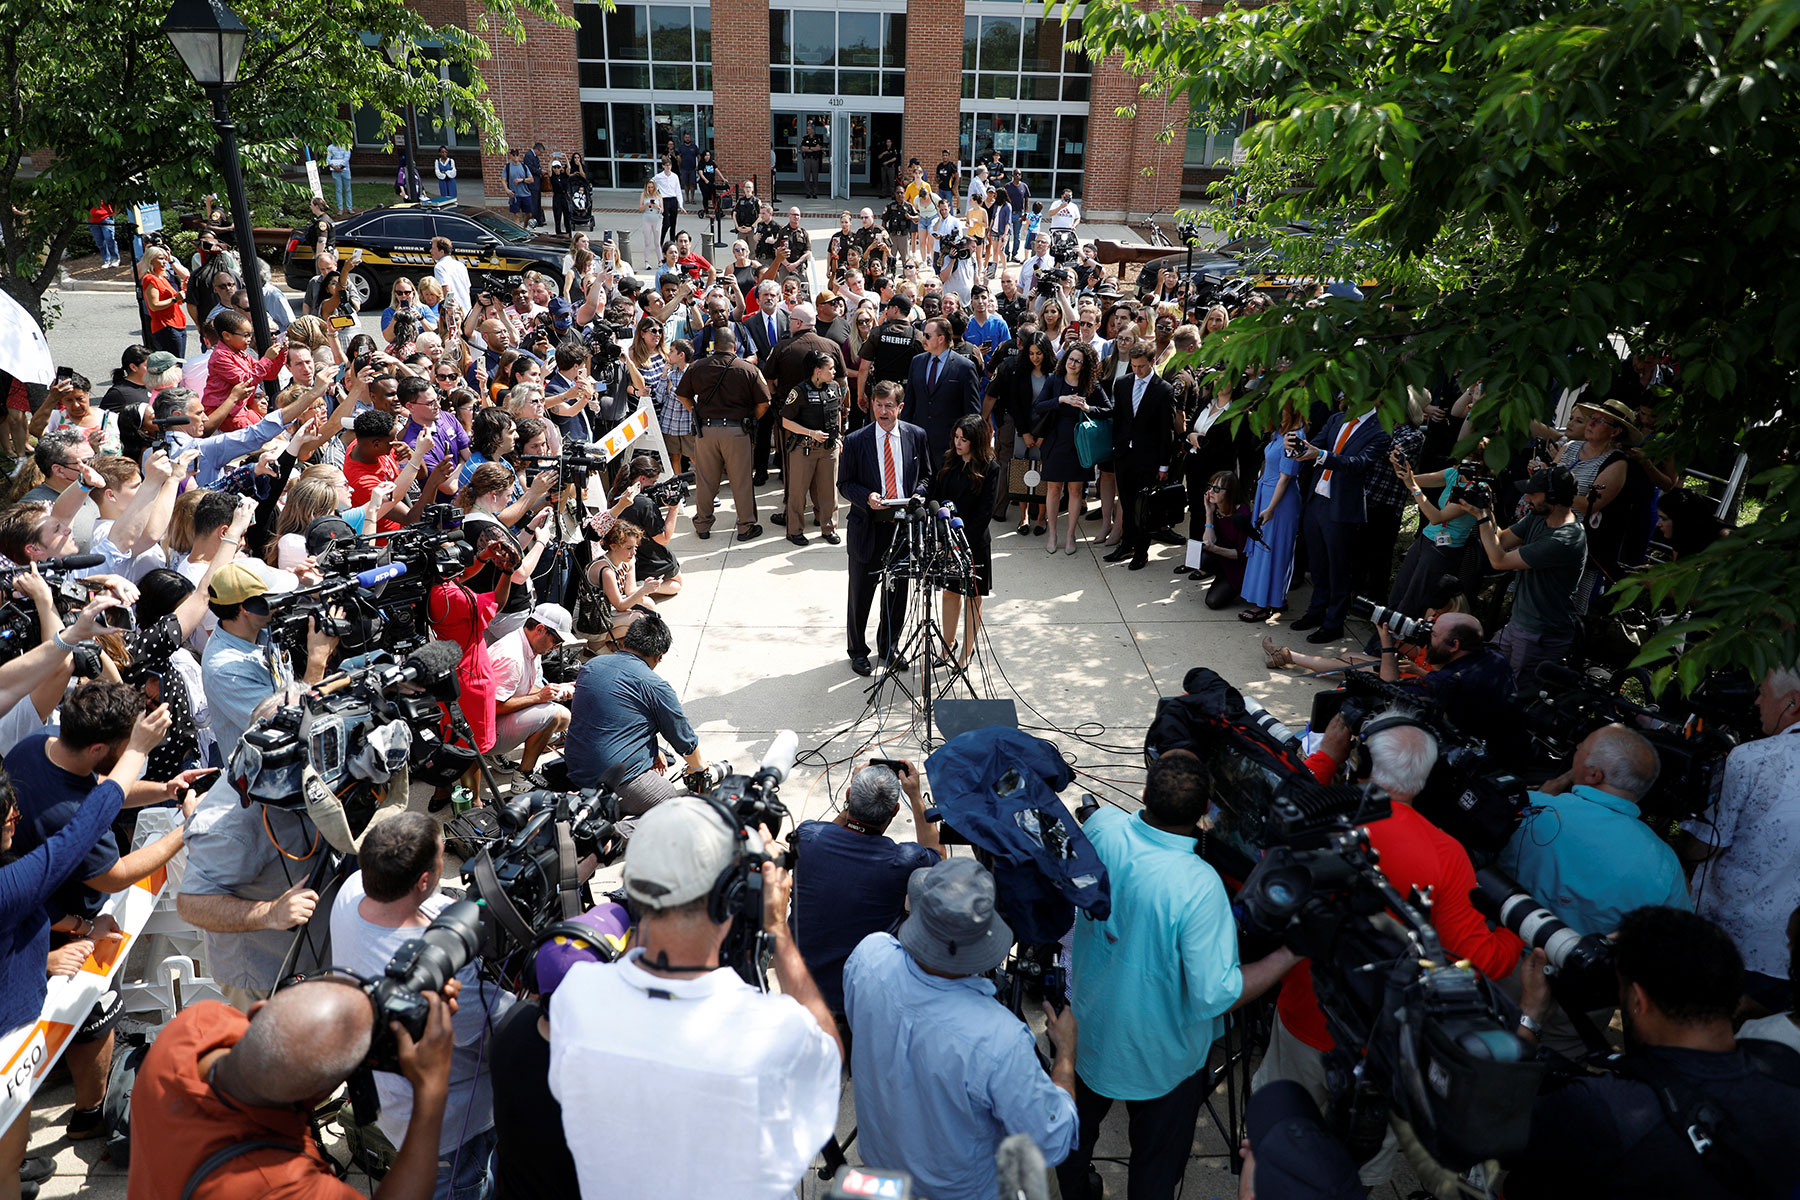 Johnny Depp's attorneys Benjamin Chew and Camille Vasquez speak to the media after the jury announced split verdicts in favor of both Johnny Depp and his ex-wife Amber Heard on their claim and counter-claim in the Depp v. Heard civil defamation trial at the Fairfax County Circuit Courthouse in Fairfax, Virginia, June 1, 2022. (REUTERS/Tom Brenner)